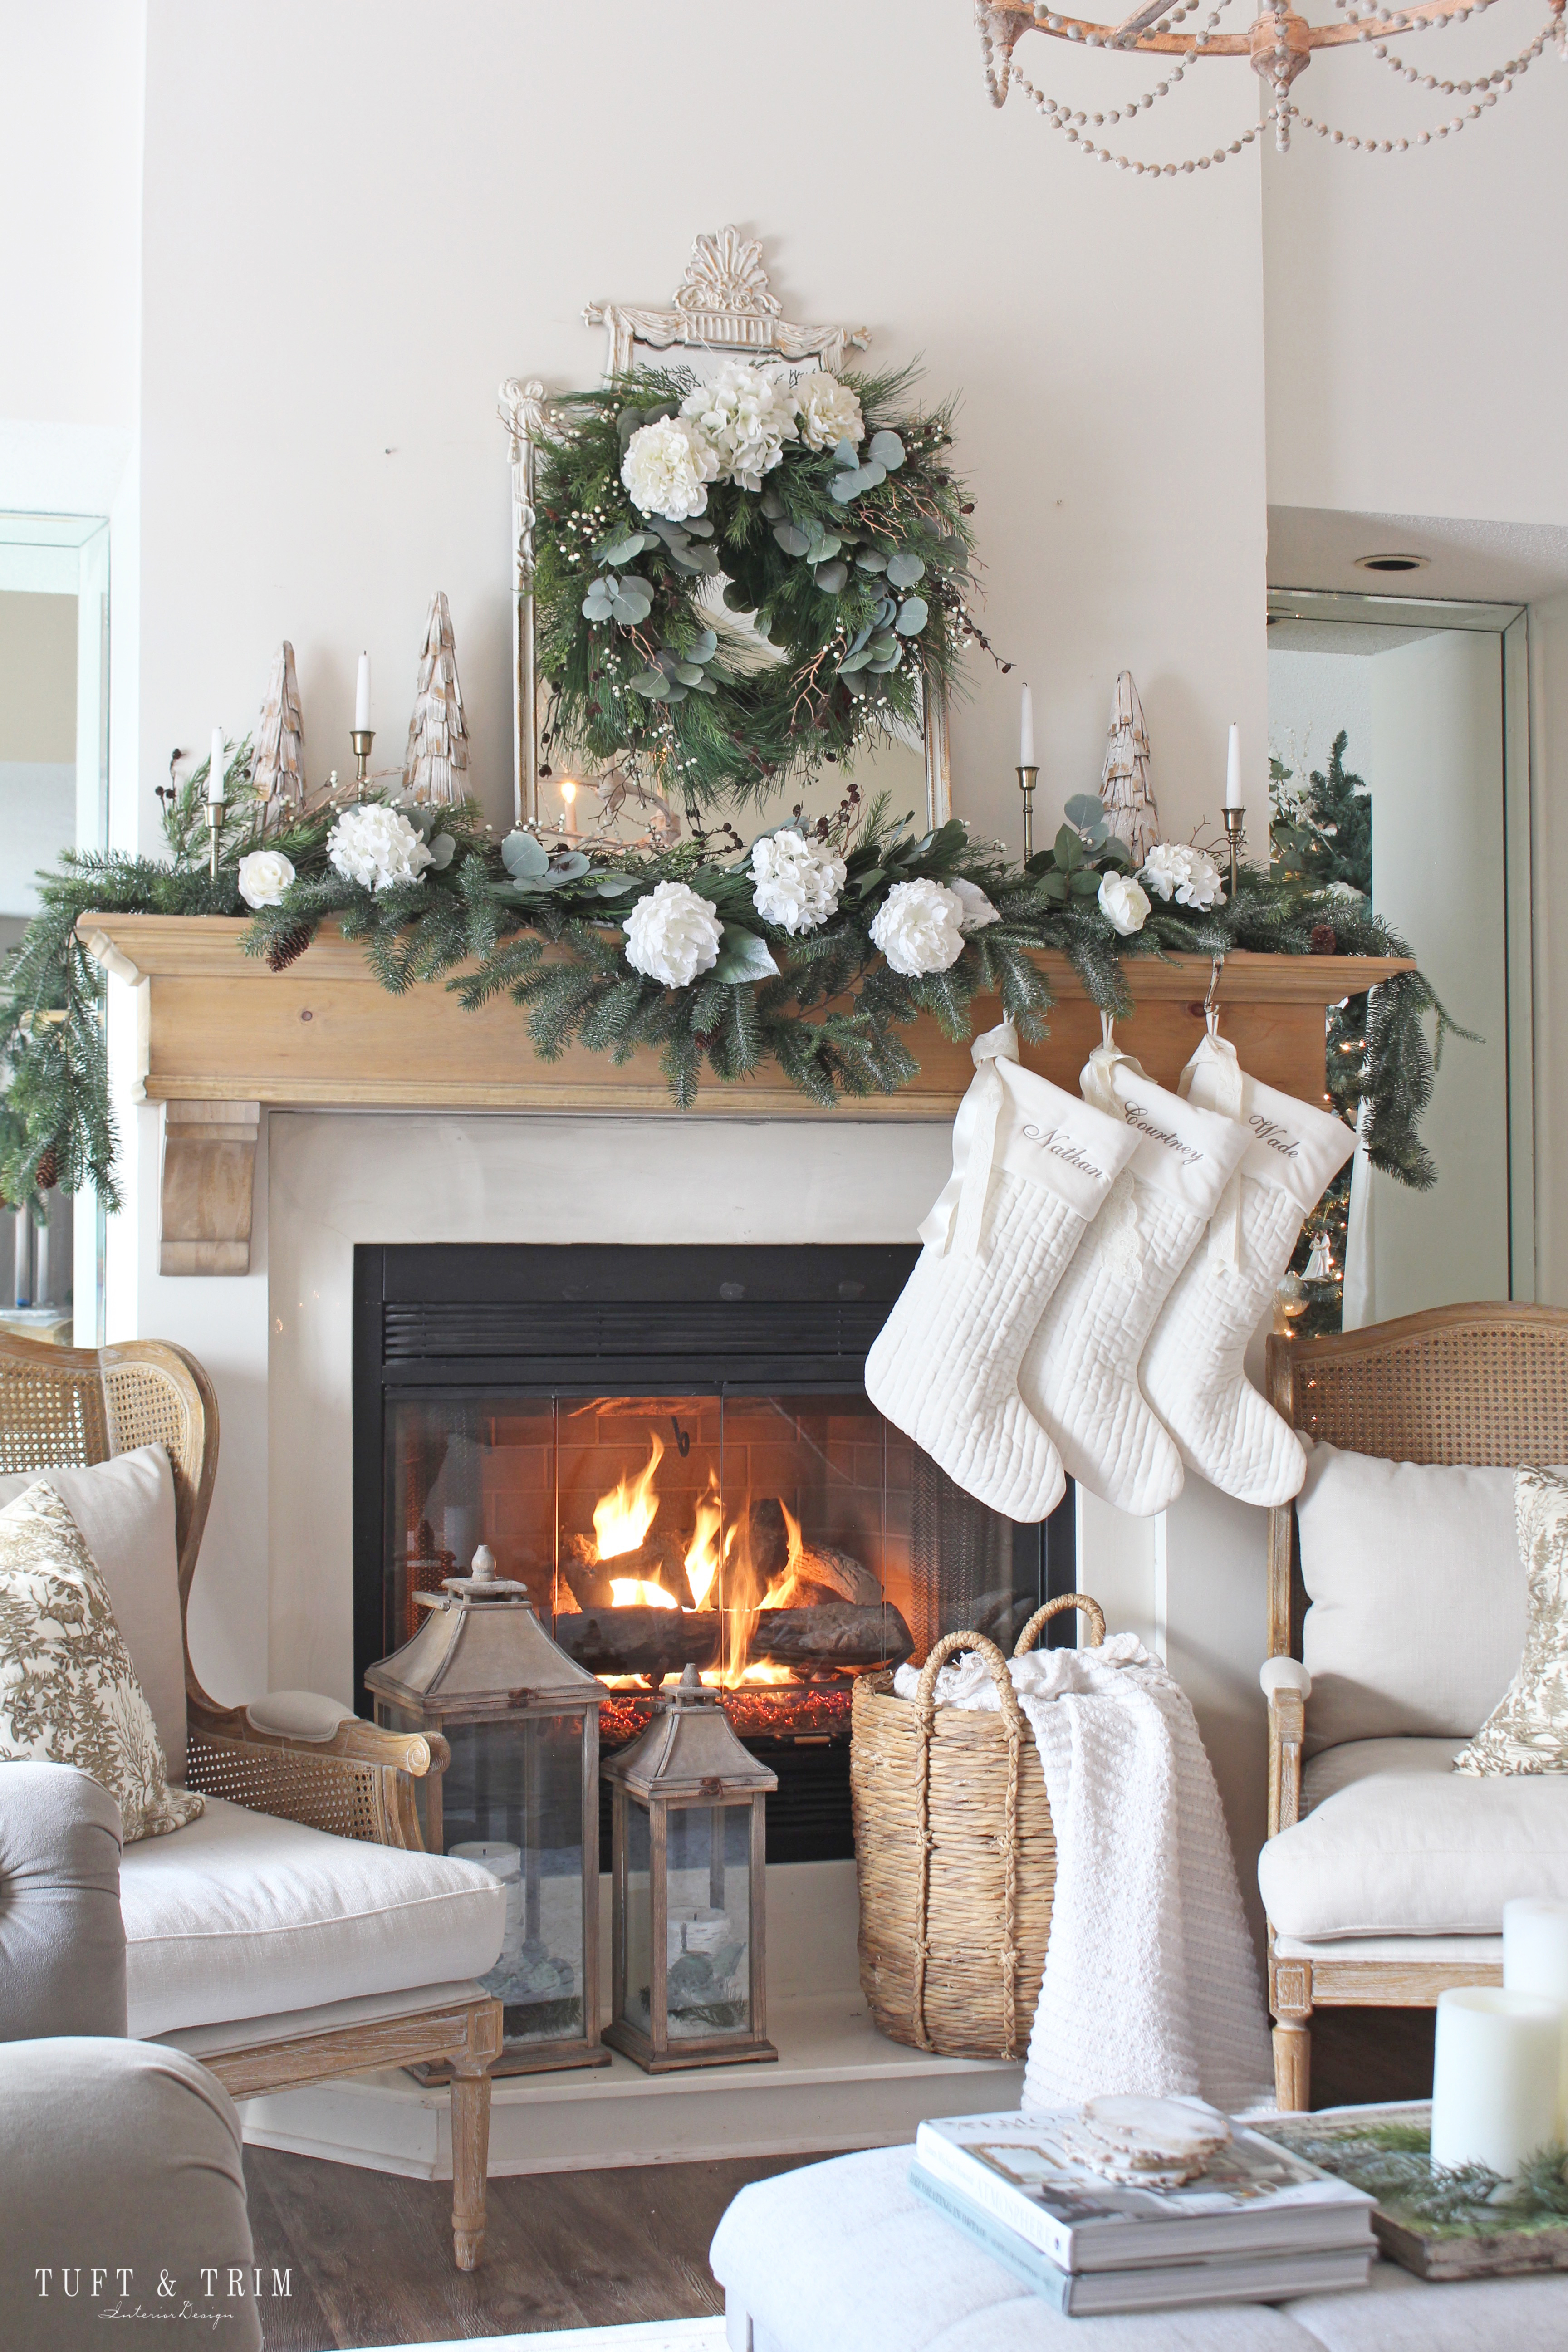 Christmas Mantel with Flowers & Mixed Greenery - Tuft & Trim